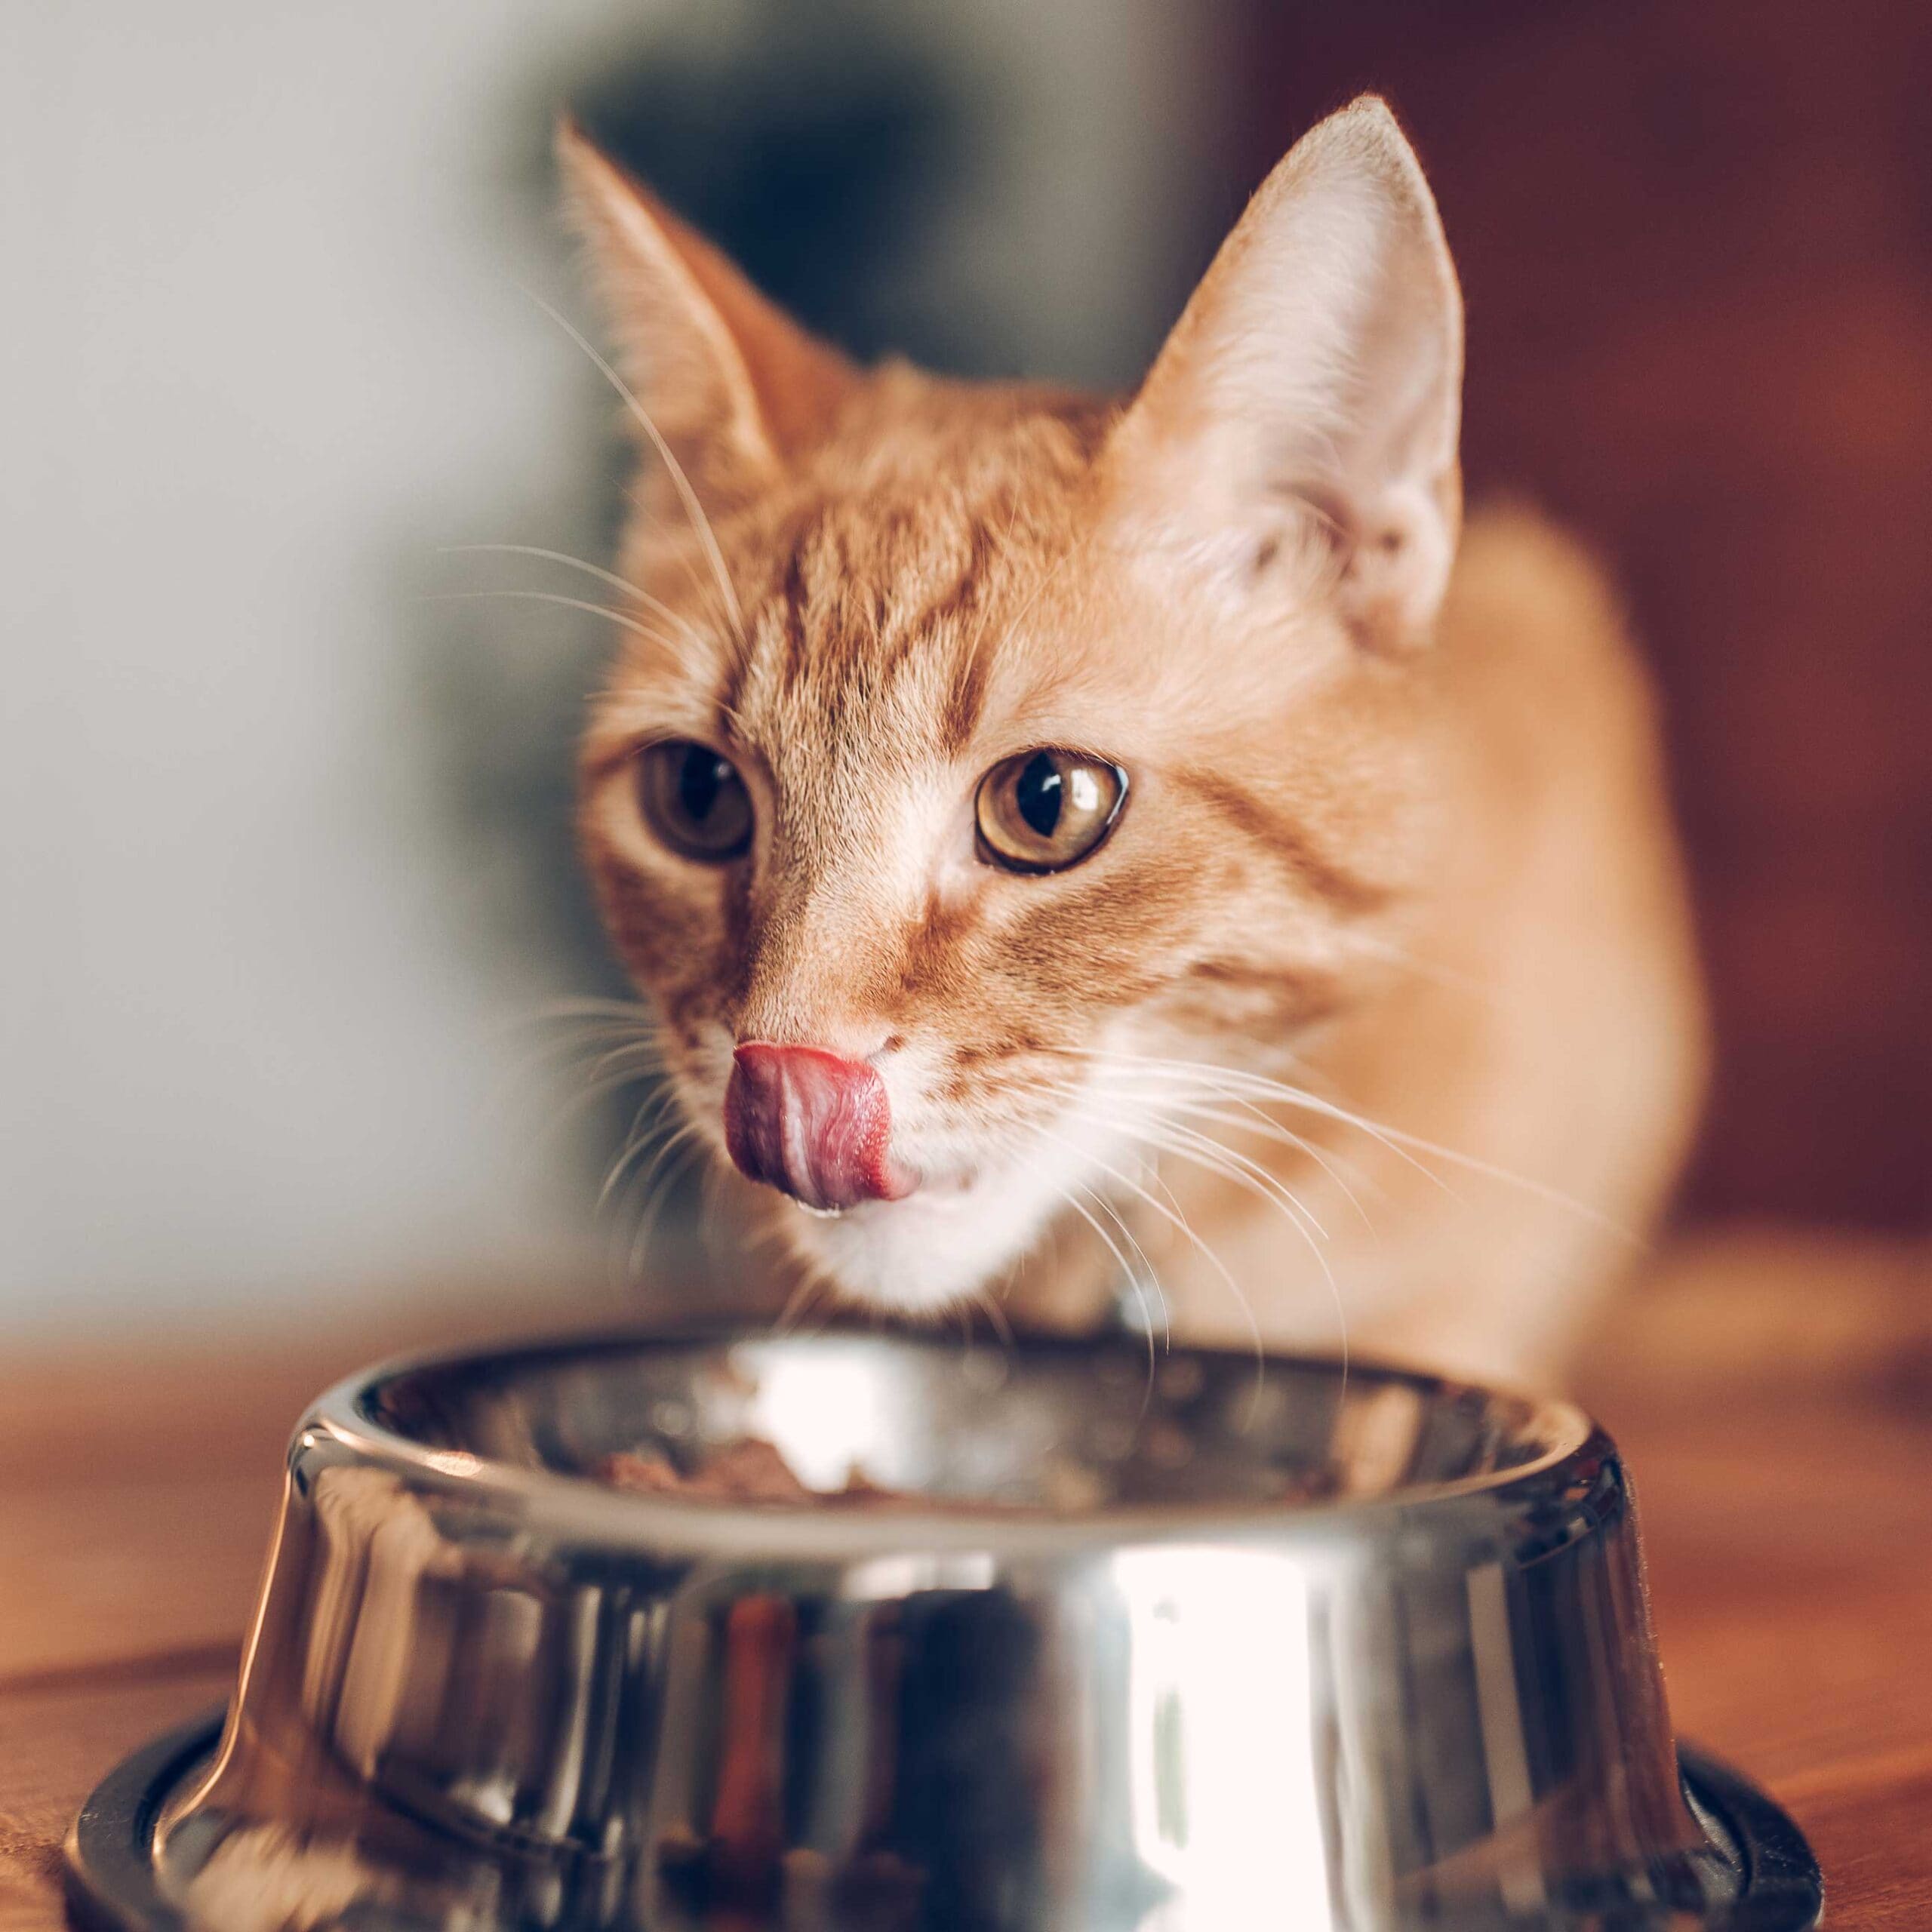 cat food for all ages: adult cat eating food